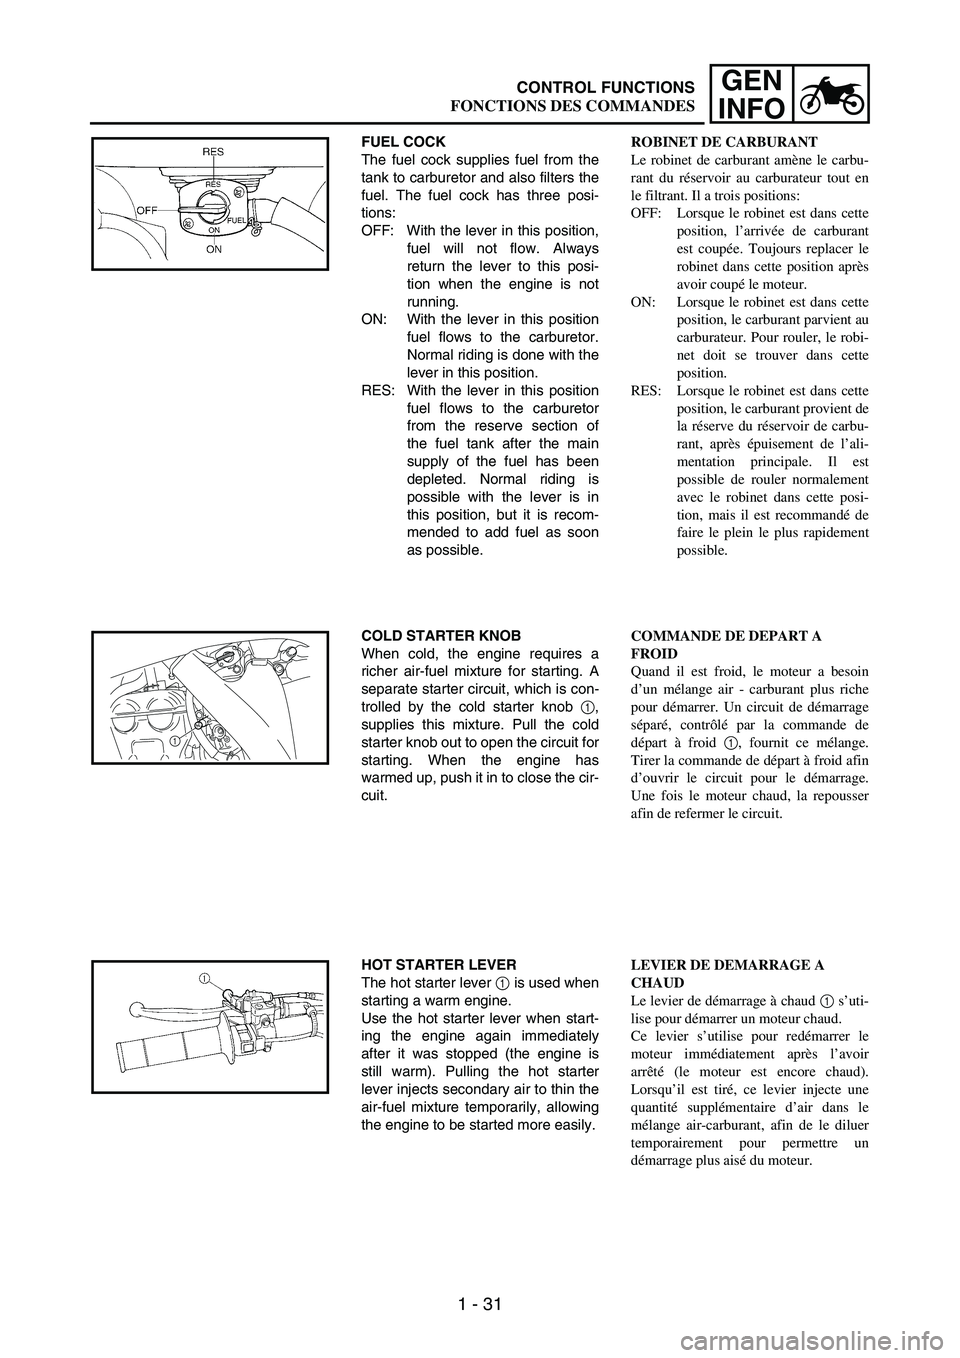 YAMAHA WR 250F 2007  Owners Manual 1 - 31
GEN
INFO
FUEL COCK
The fuel cock supplies fuel from the
tank to carburetor and also filters the
fuel. The fuel cock has three posi-
tions:
OFF: With the lever in this position,
fuel will not fl